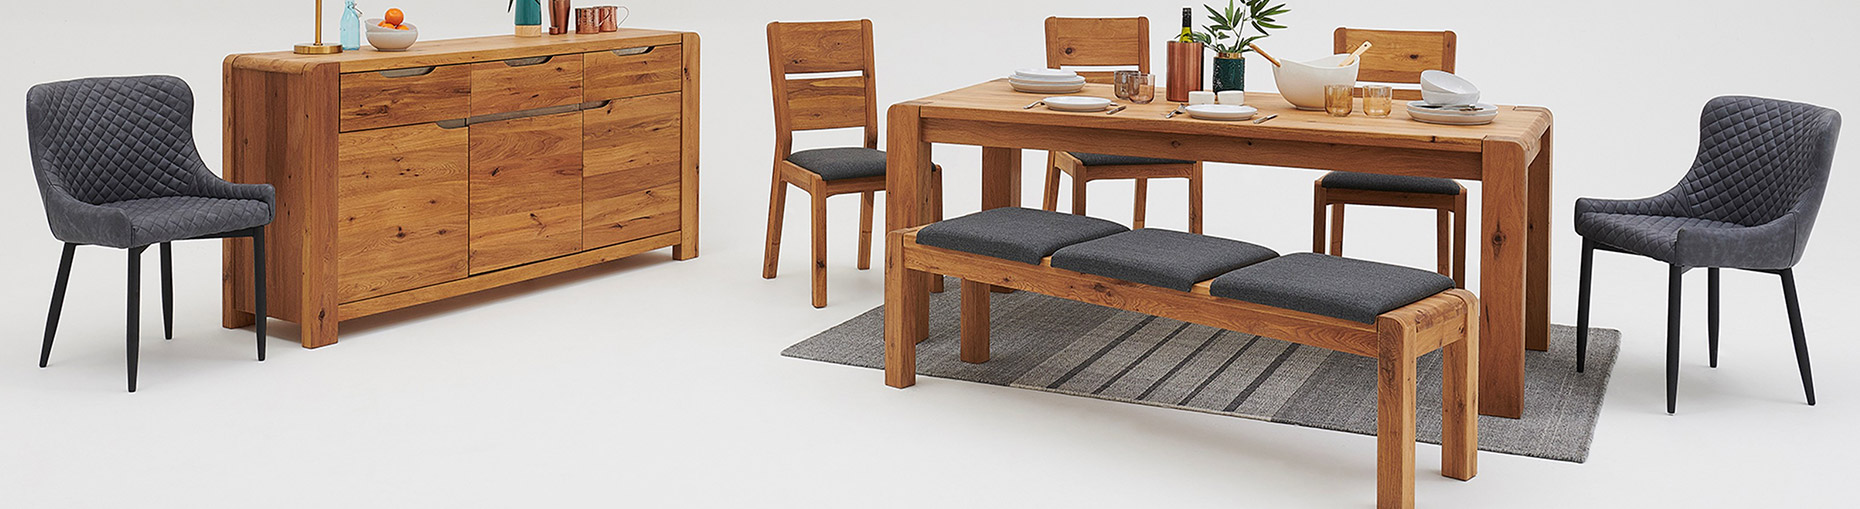 Verona dining collection at Forrest Furnishing